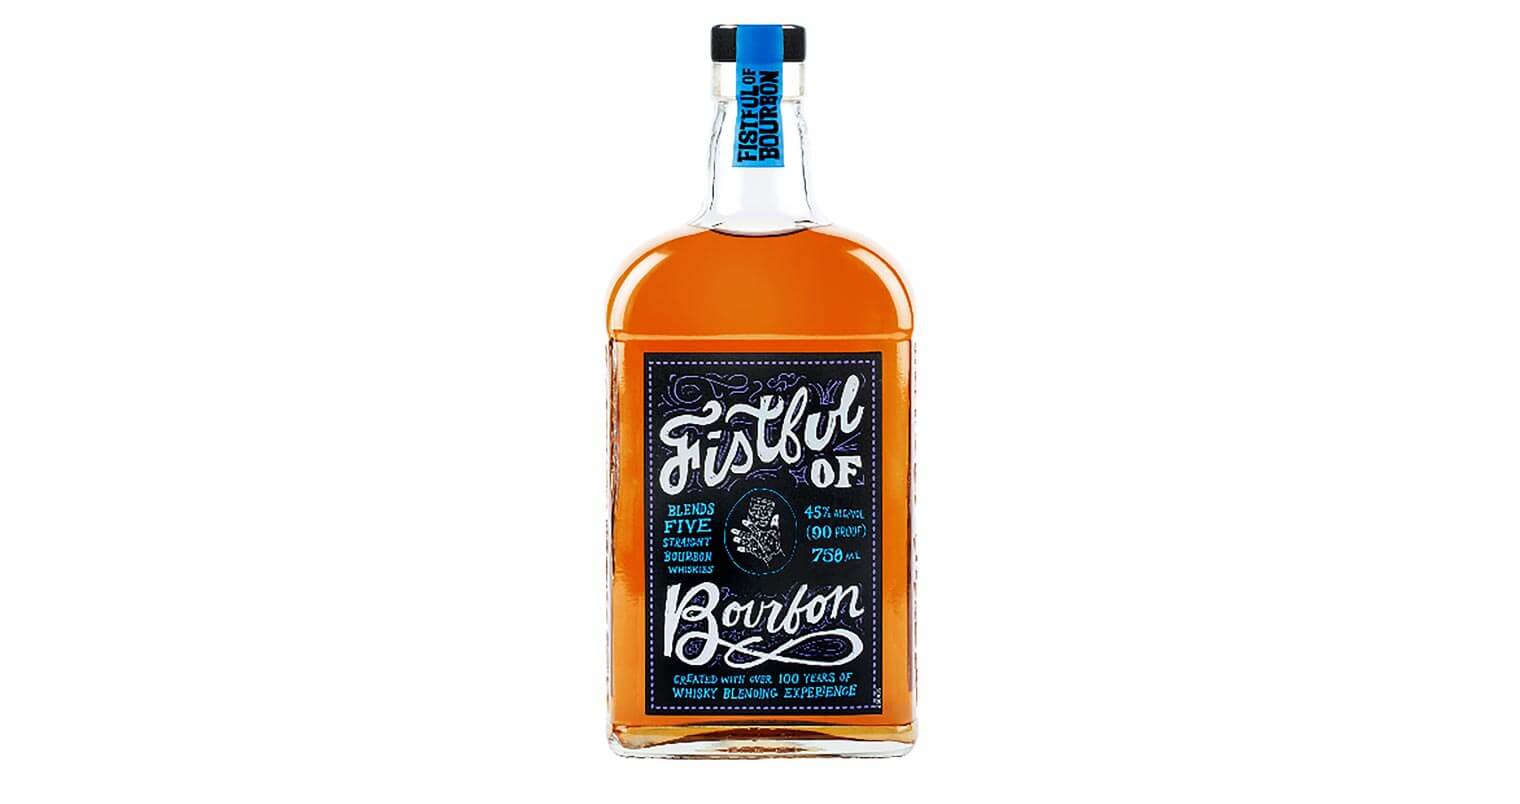 Fistful of Bourbon, bottle on white, featured image